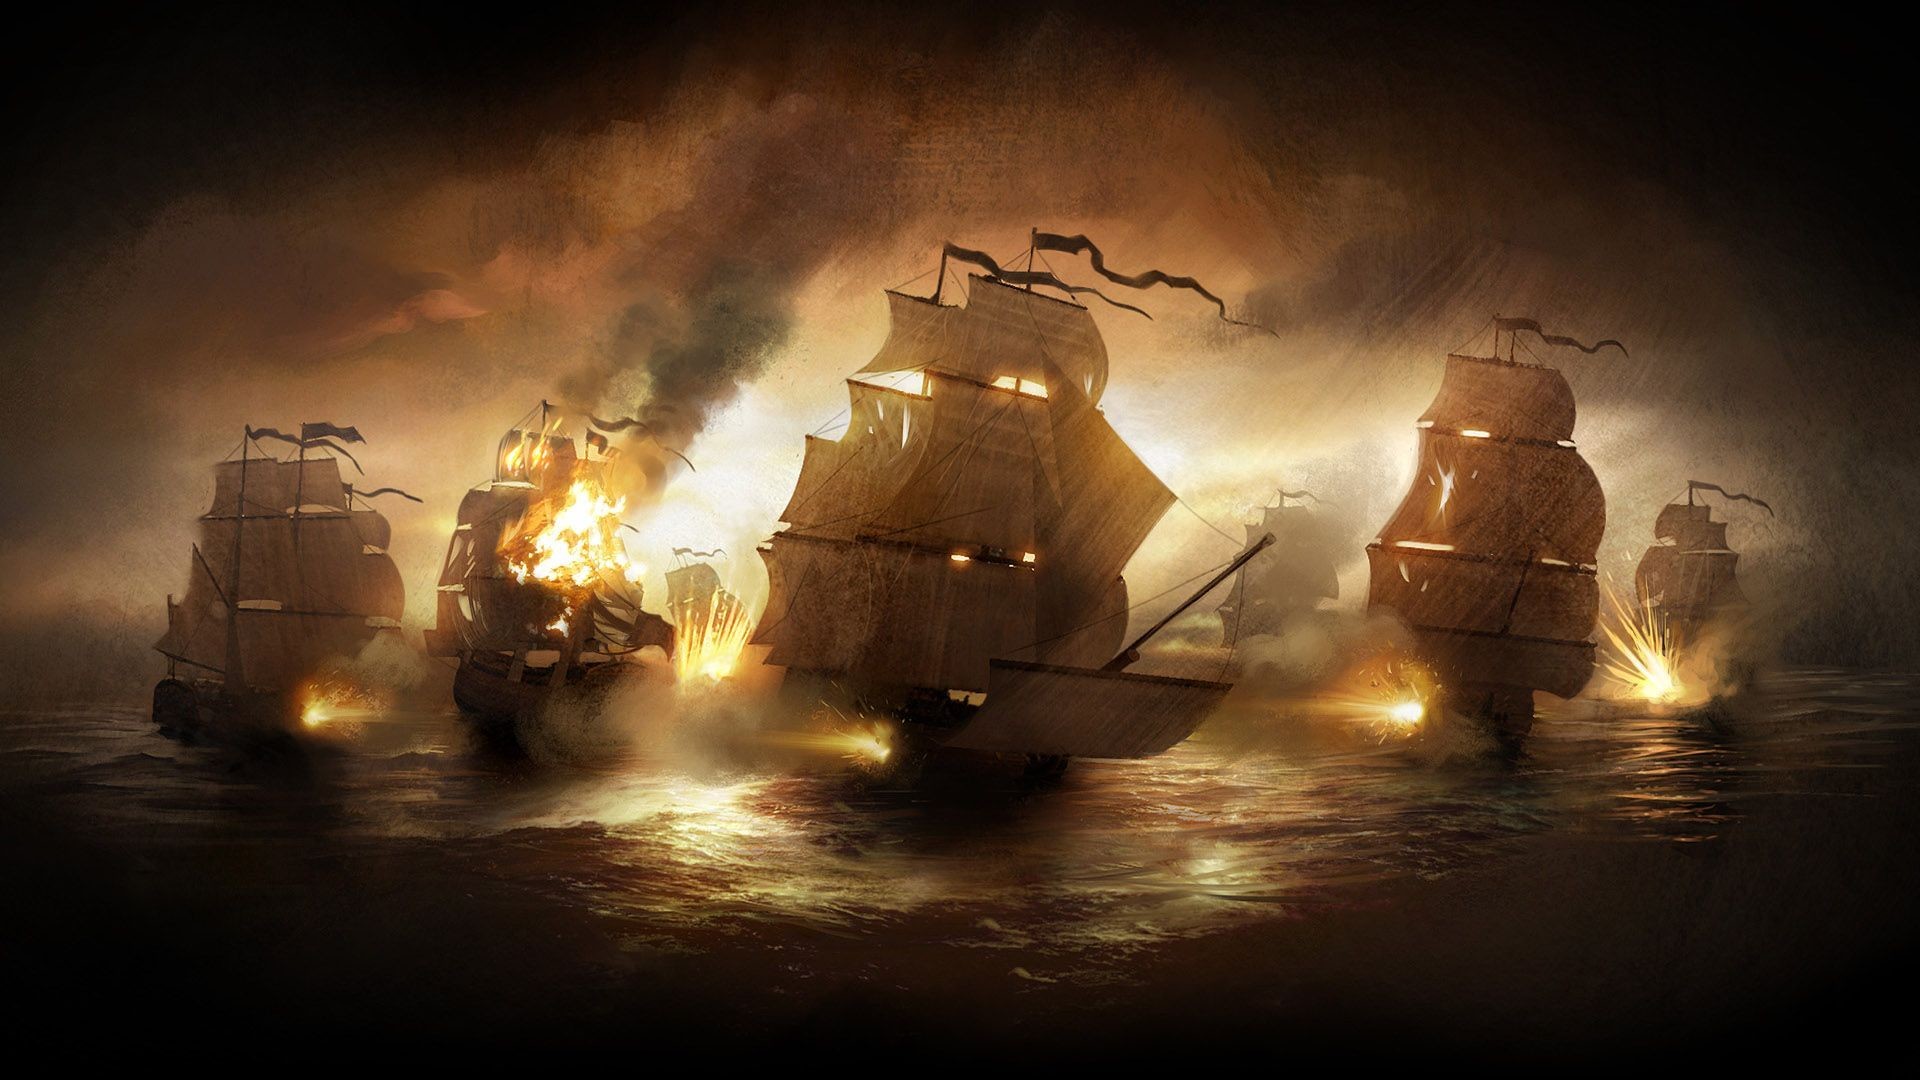 1920x1080 Pirate Wallpapers HD Desktop Backgrounds Images and Pictures